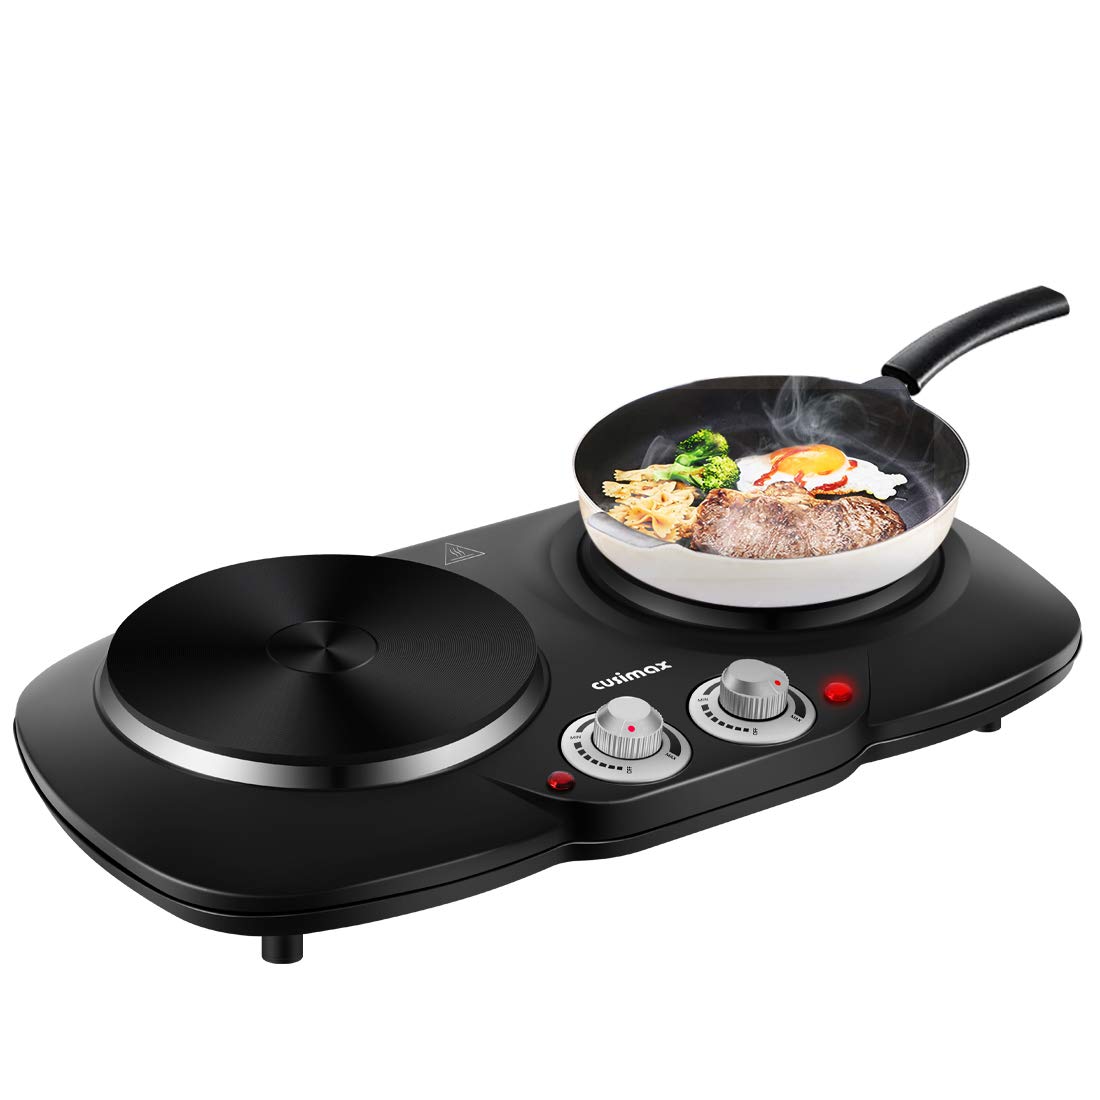 Cusimax 2500W Portable Black Double Hot Plate for Cooking